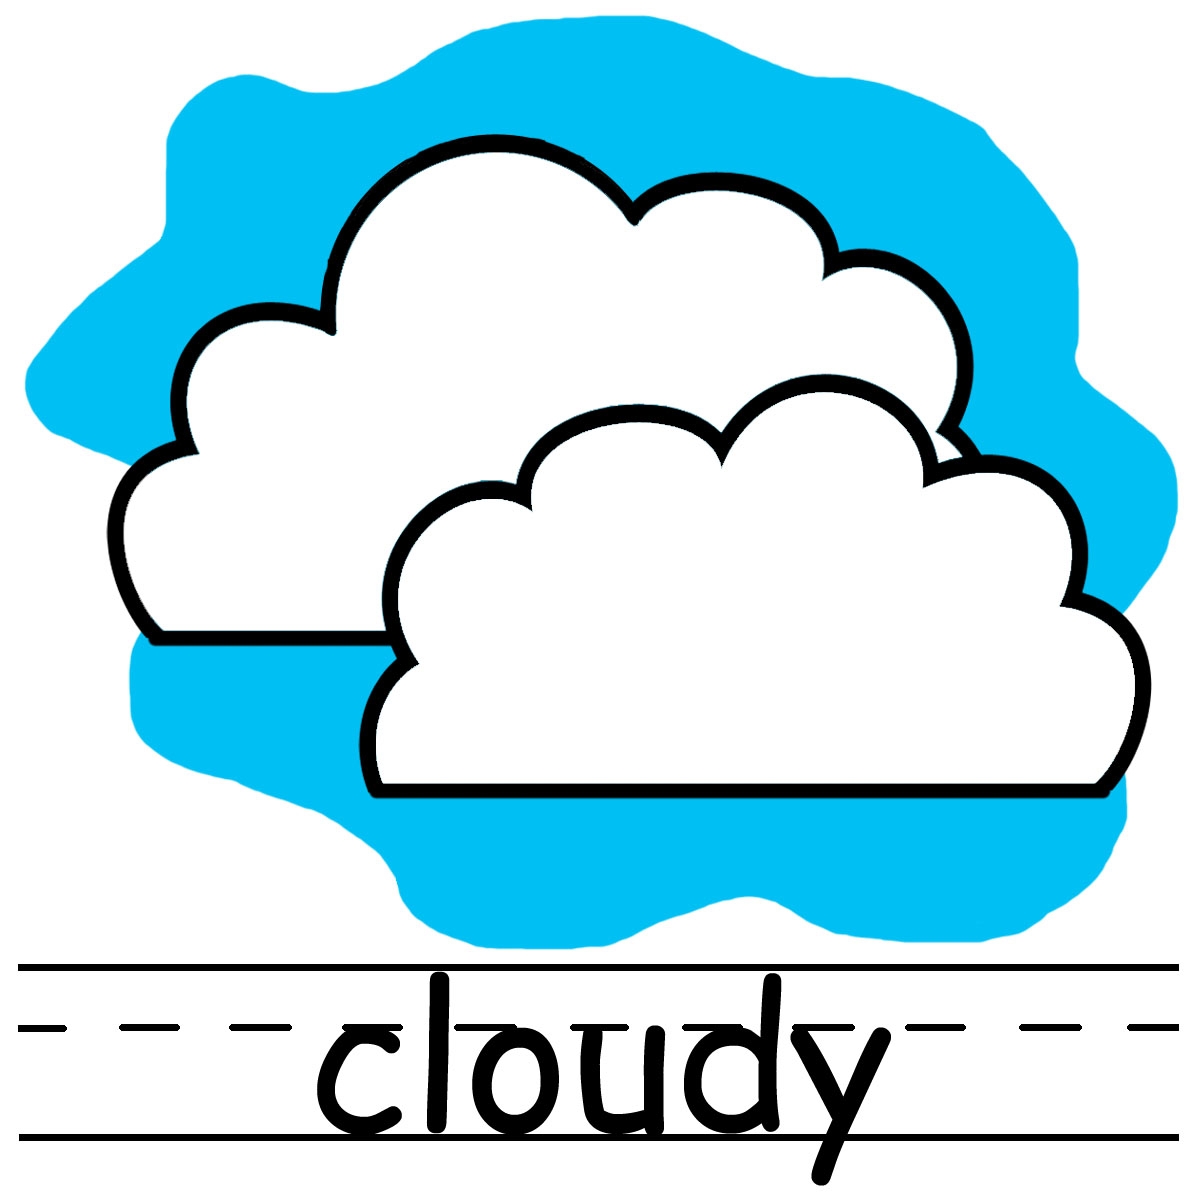 Cloudy cliparts